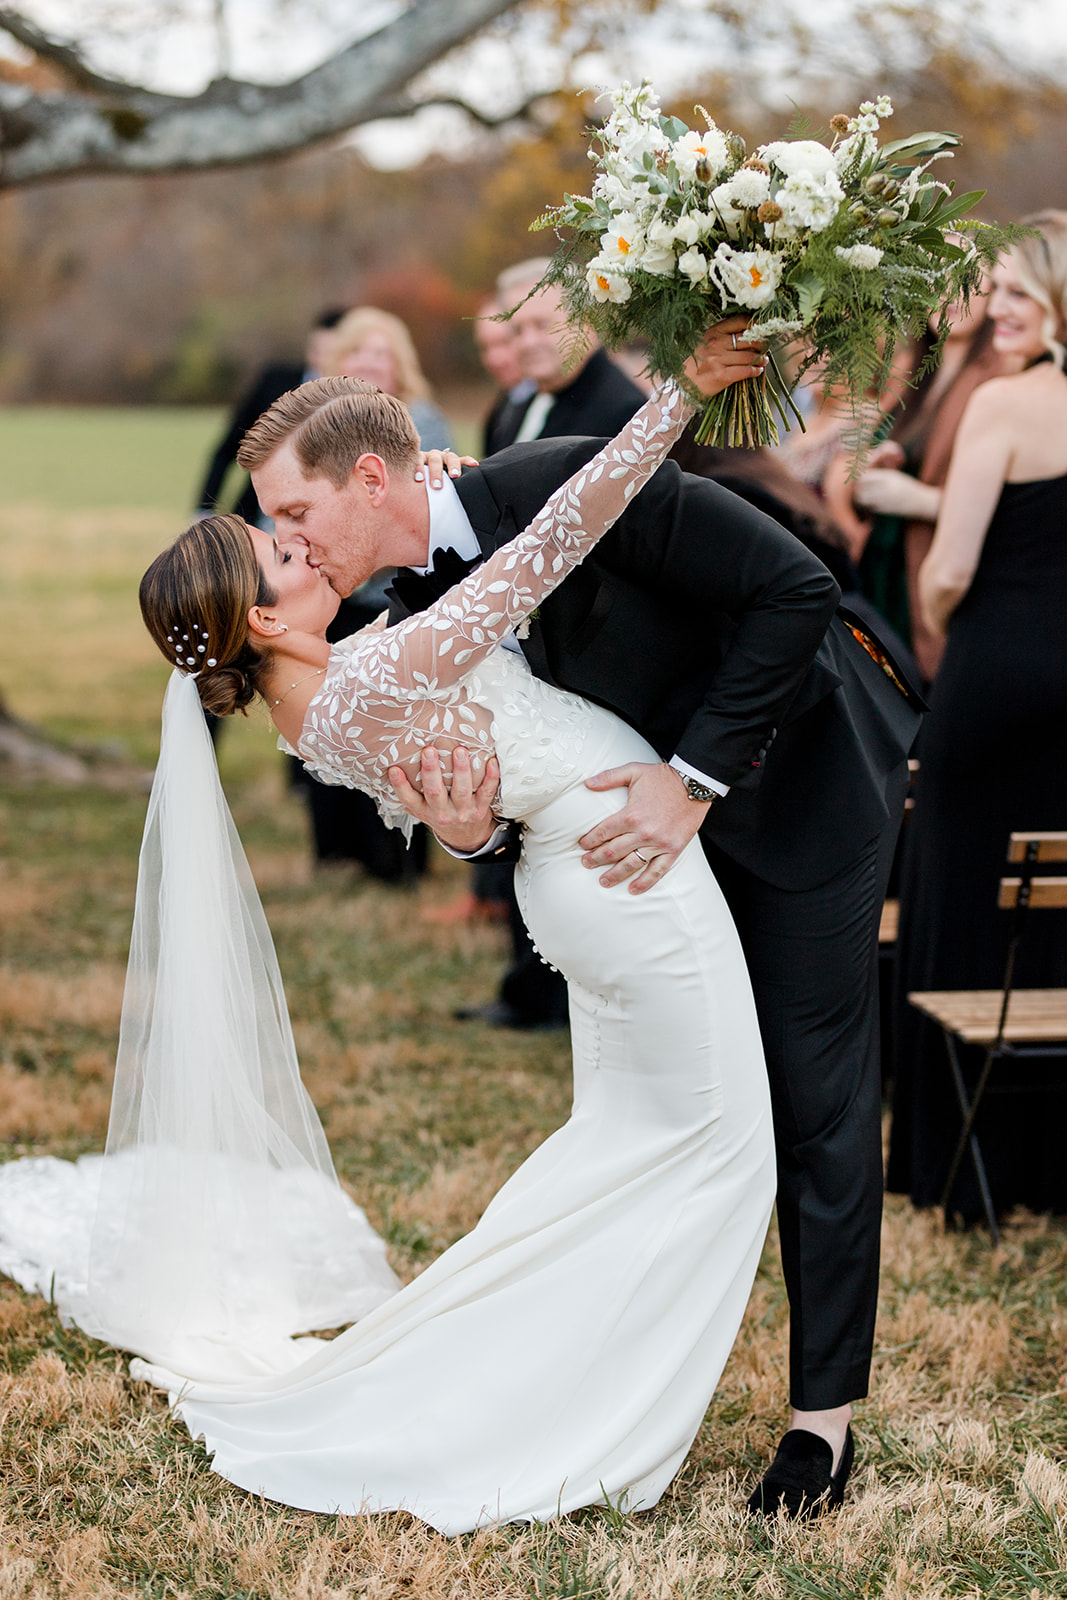 Southall Meadows Nashville Wedding with Modern Details